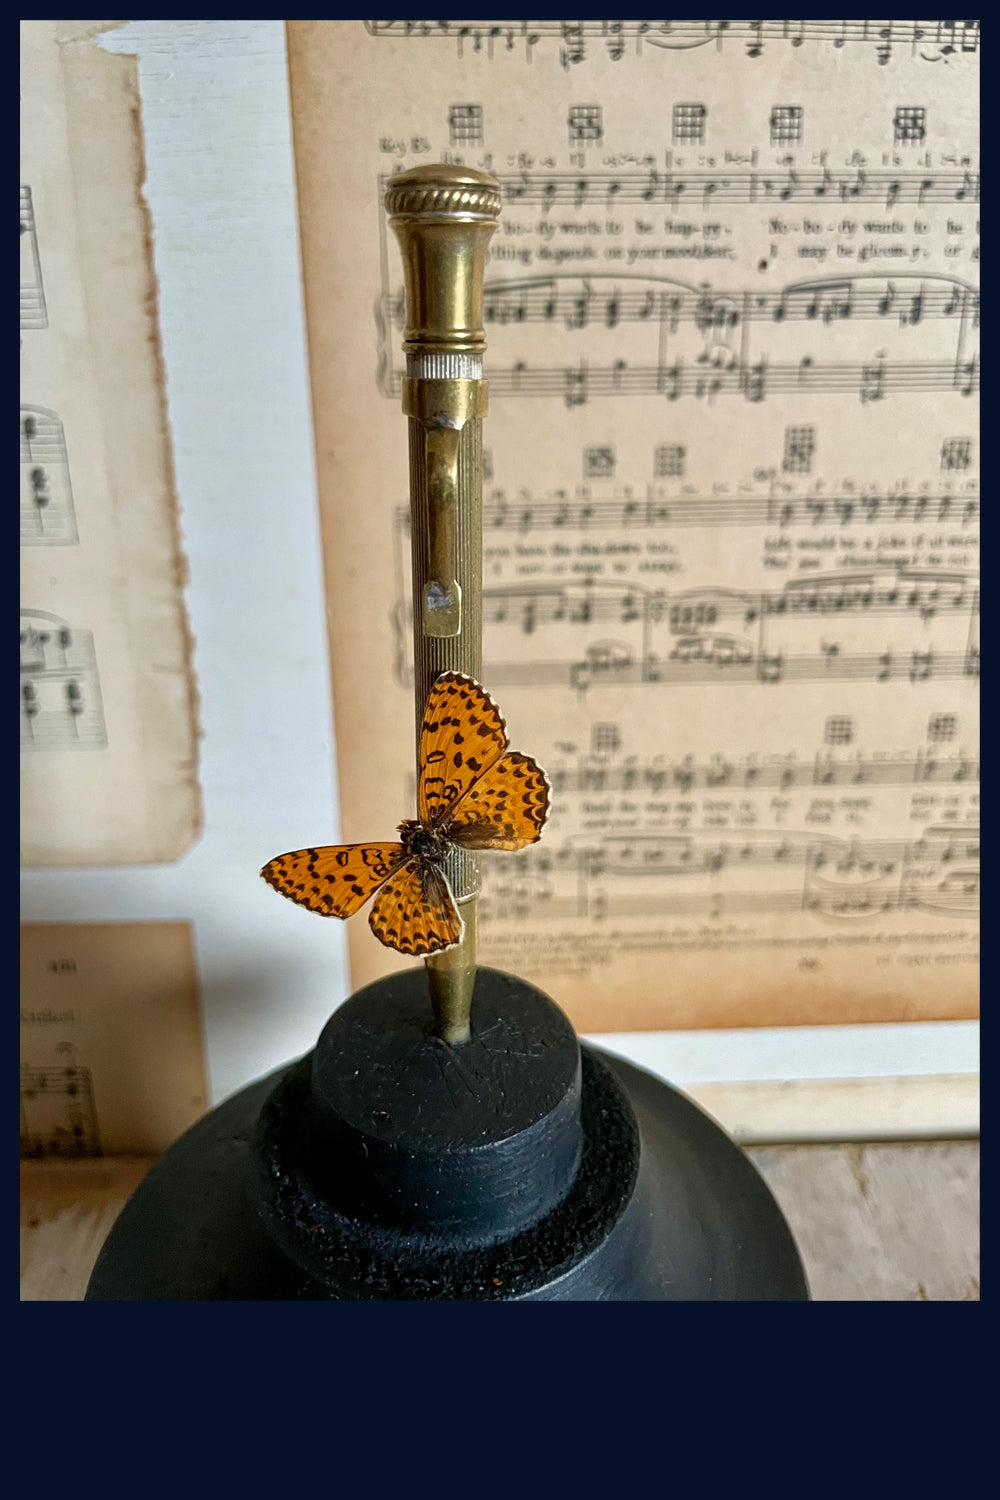 Enigma Variations Collection: Vintage Brass Propelling Pencil with Butterfly in a Display Dome